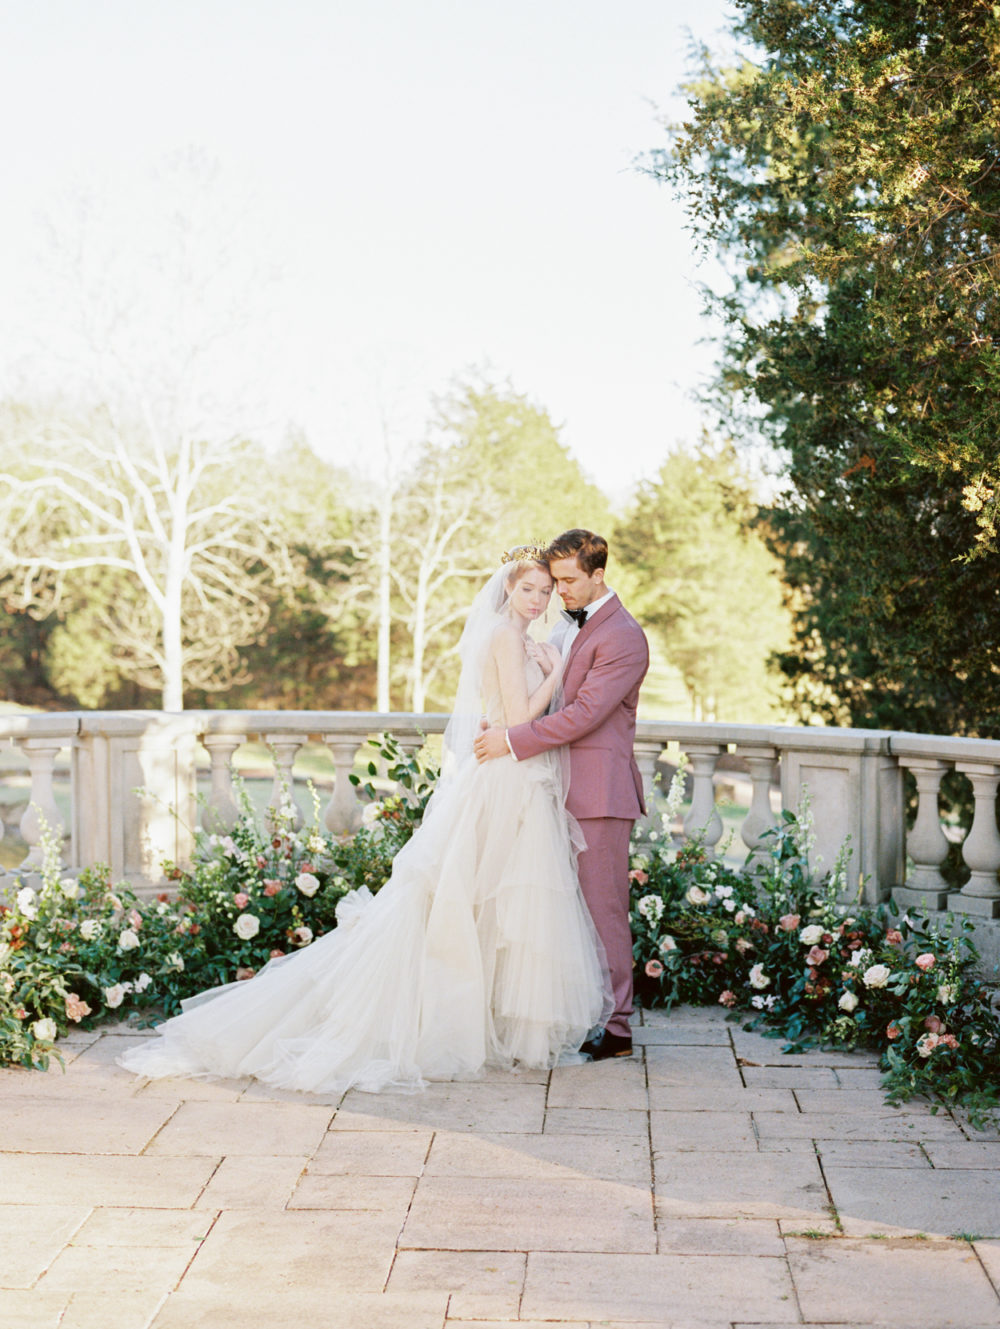 Great Marsh Estate winter wedding with muted colors